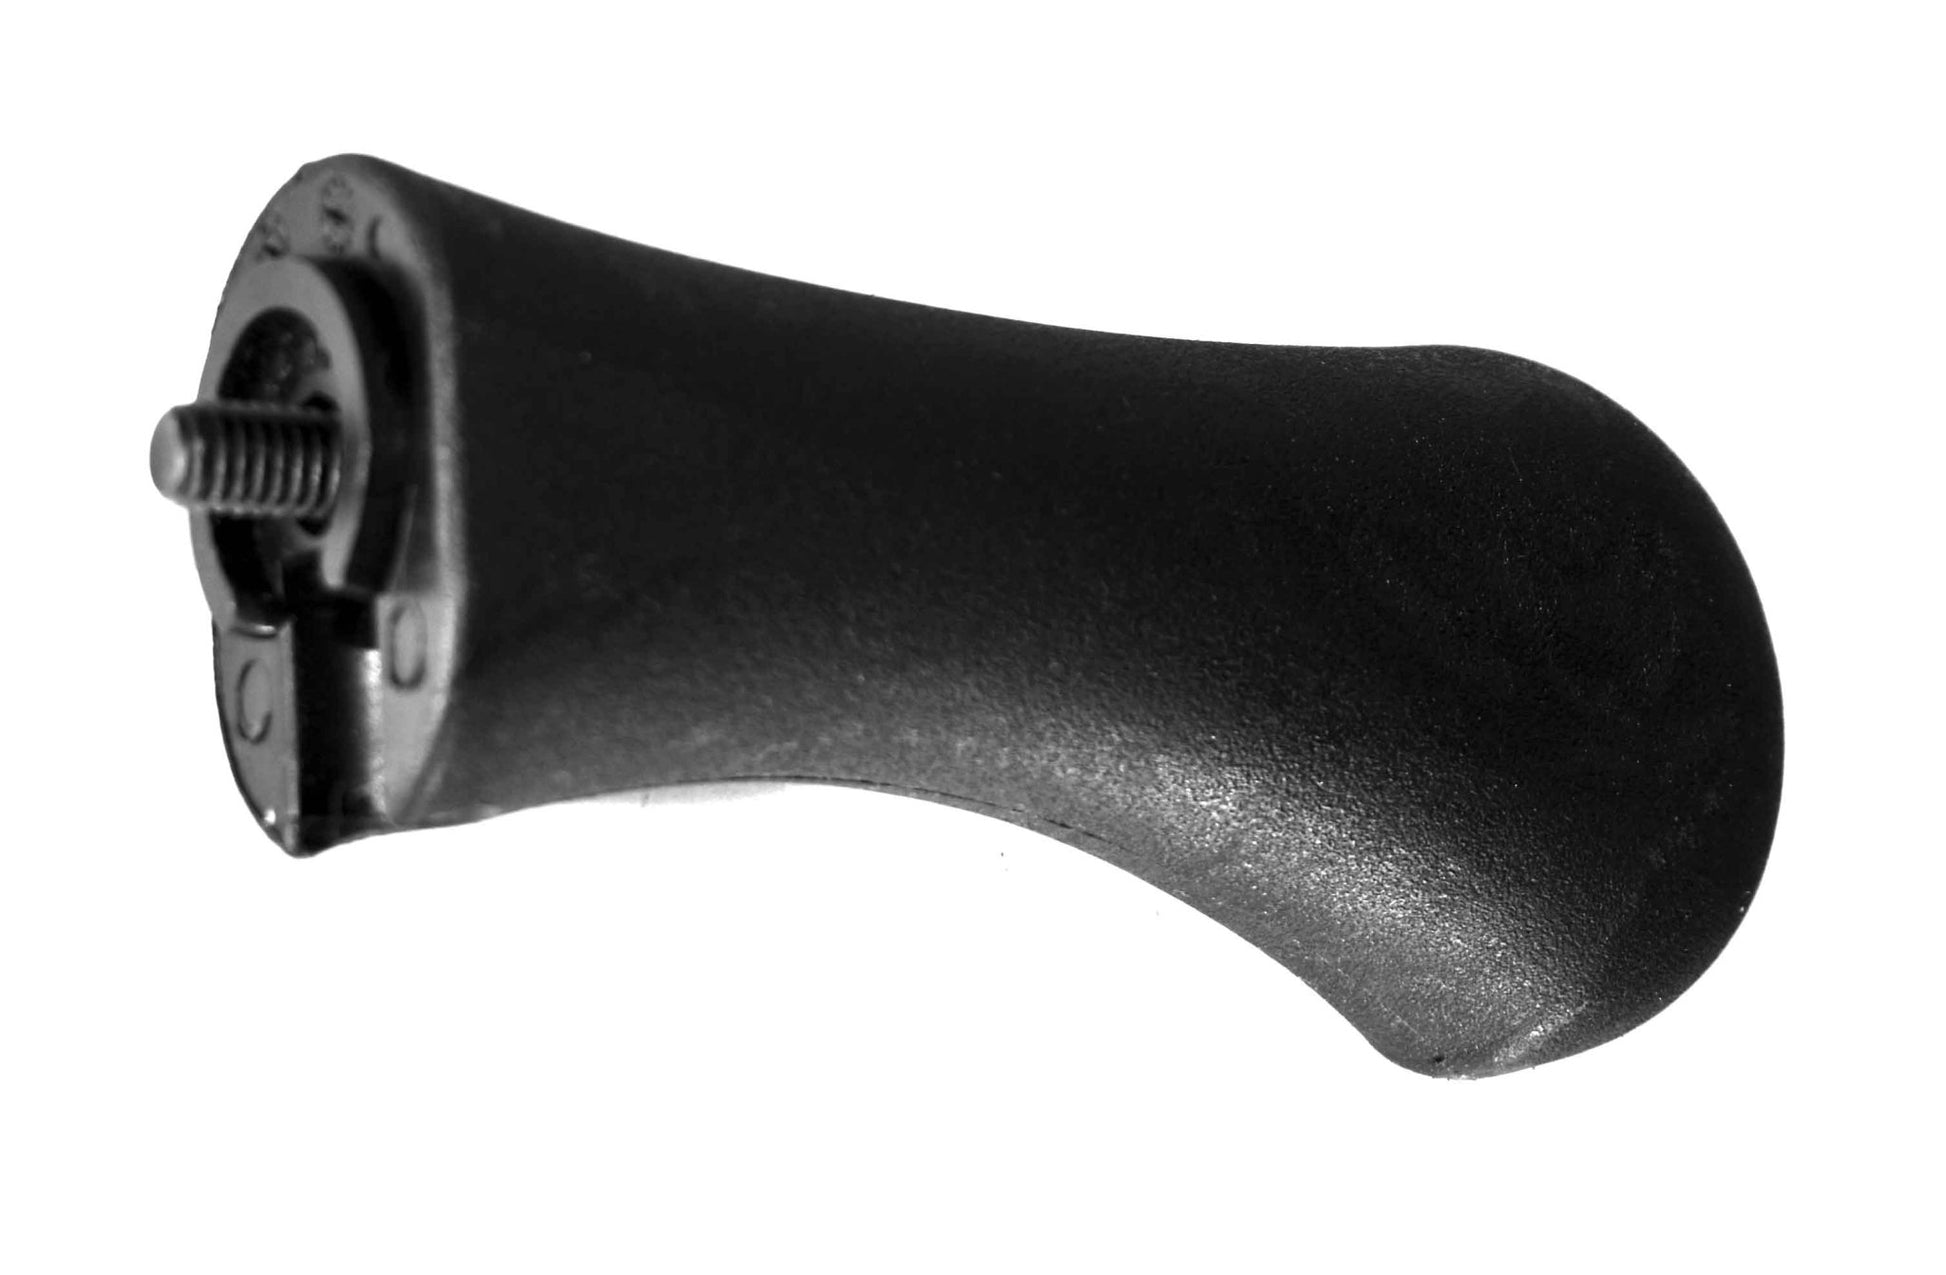 Mossberg 500 12 Gauge 20 Gauge Rear Grip Home Defense Tactical Hunting Accessory. - TRINITY SUPPLY INC